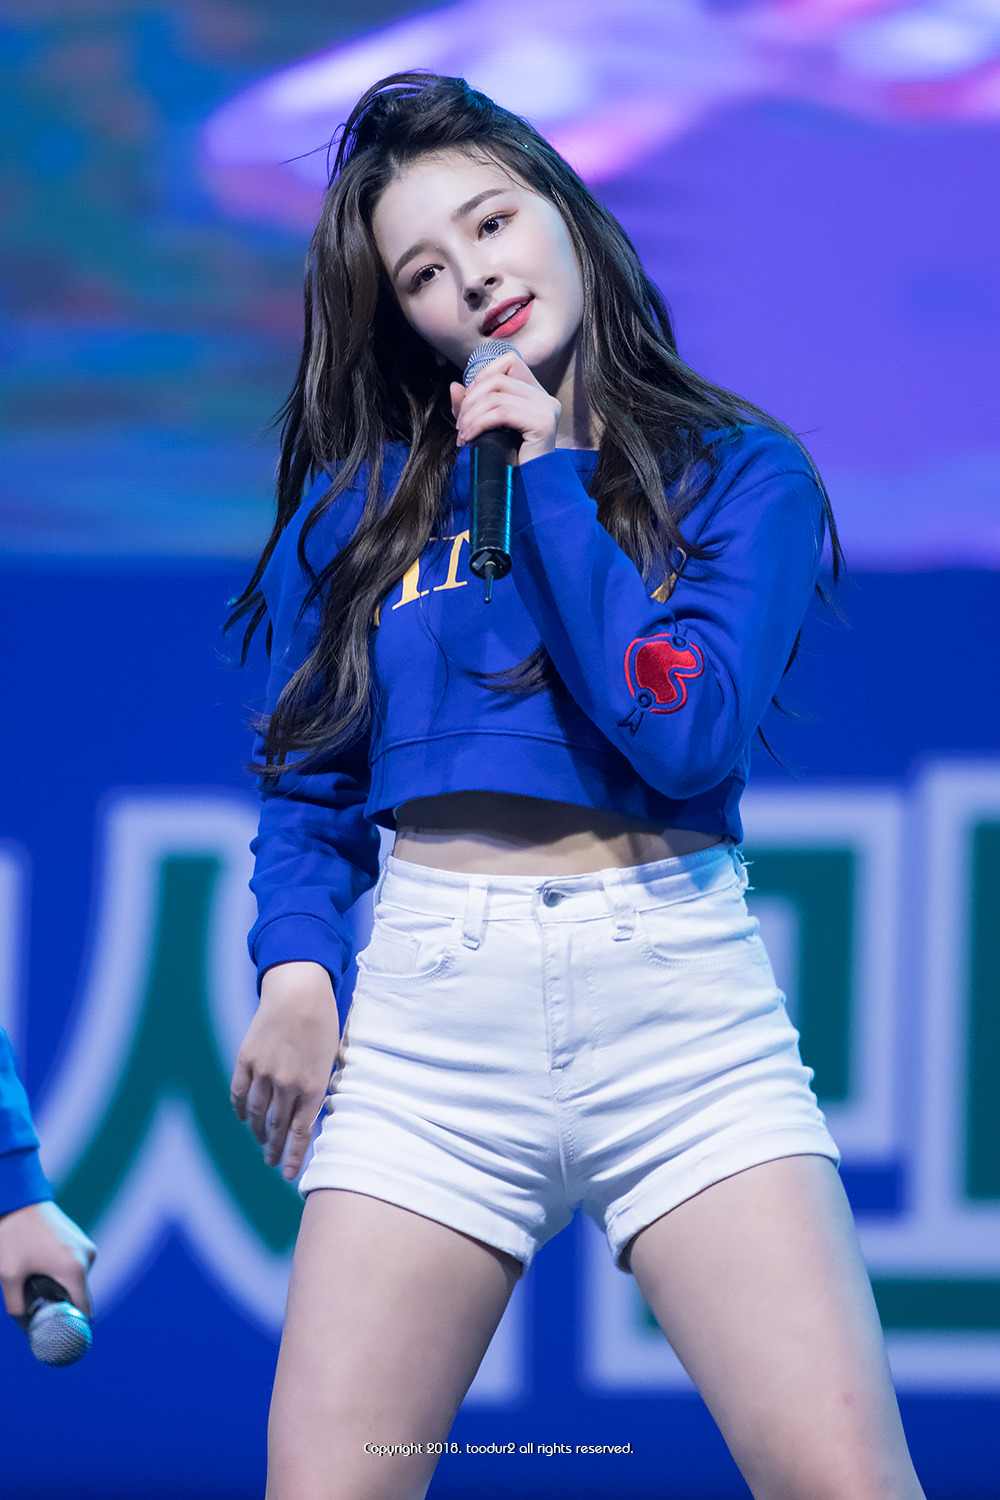 THE MOST SEXIEST OUTFIT OF NANCY MOMOLAND - 900Girls